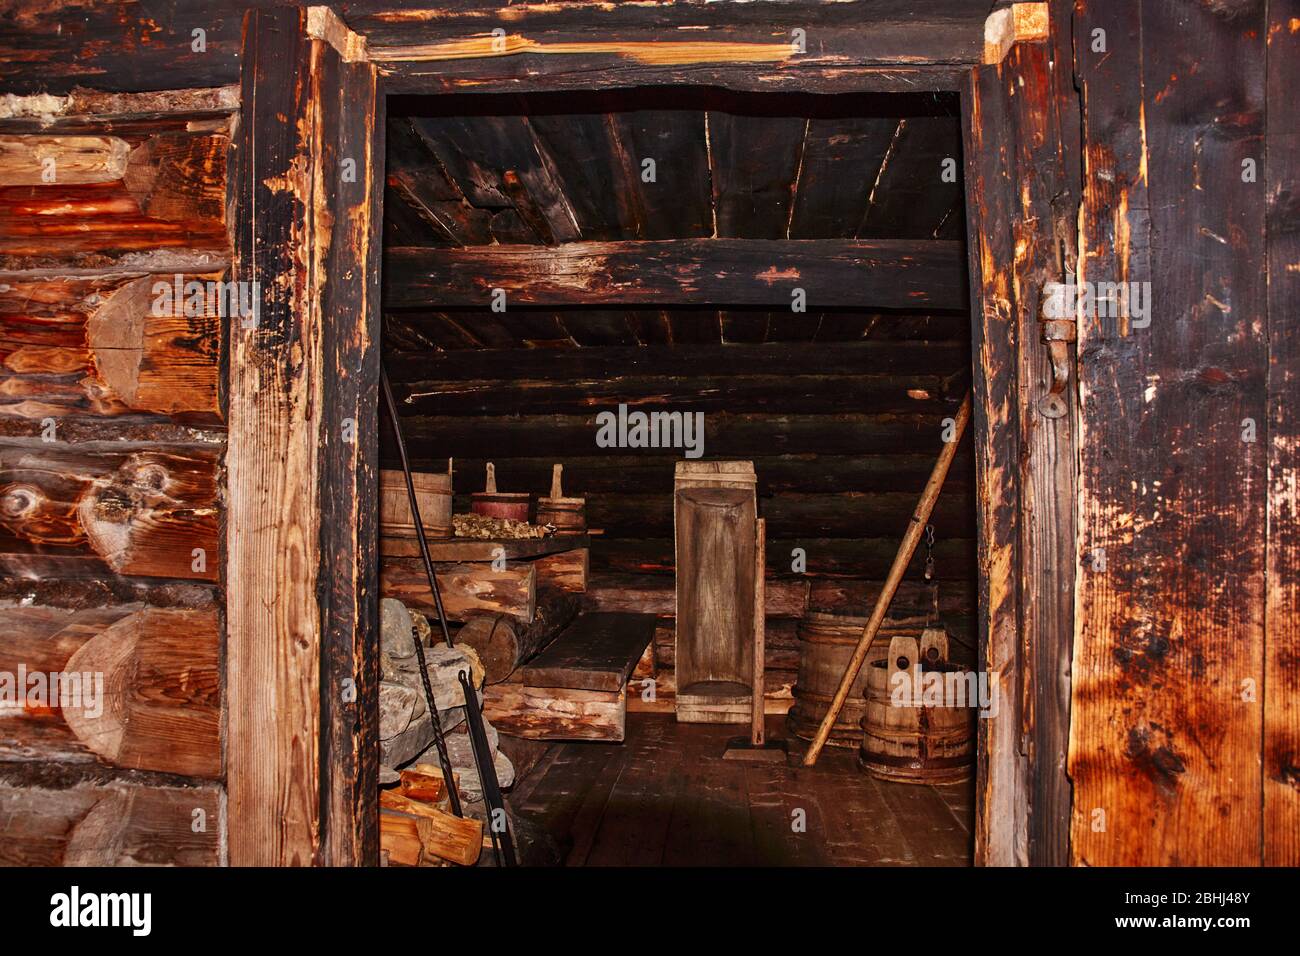 Through the door you can see the internal structure of a rural wooden barn.Inside are household items and utensils used by the family in everyday life Stock Photo